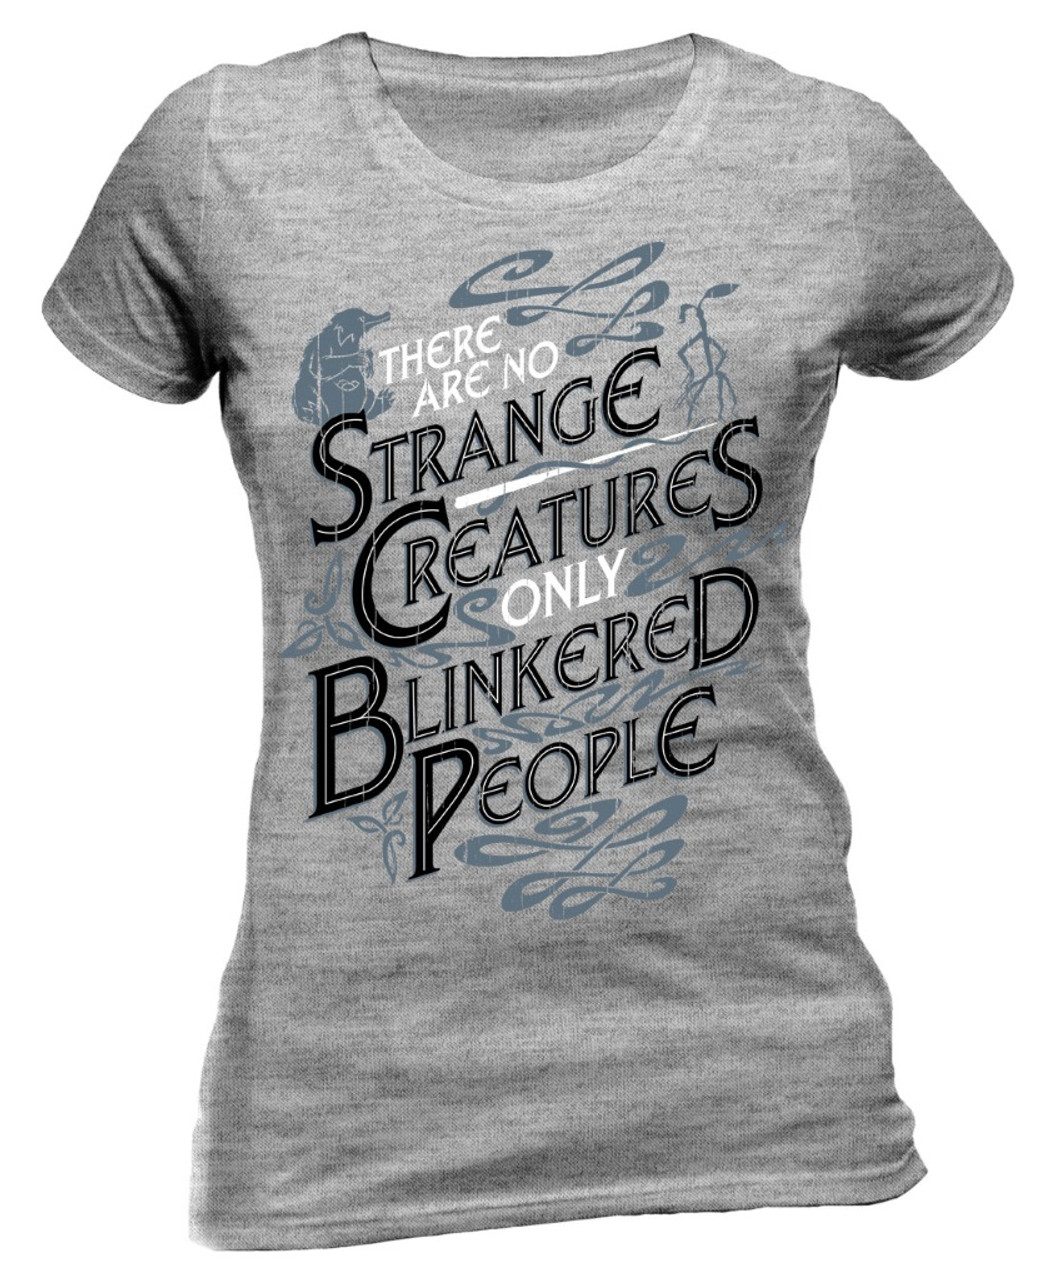 Fantastic Beasts The Crimes Of Grindelwald 'Strange Creatures' (Grey) Womens Fitted T-Shirt